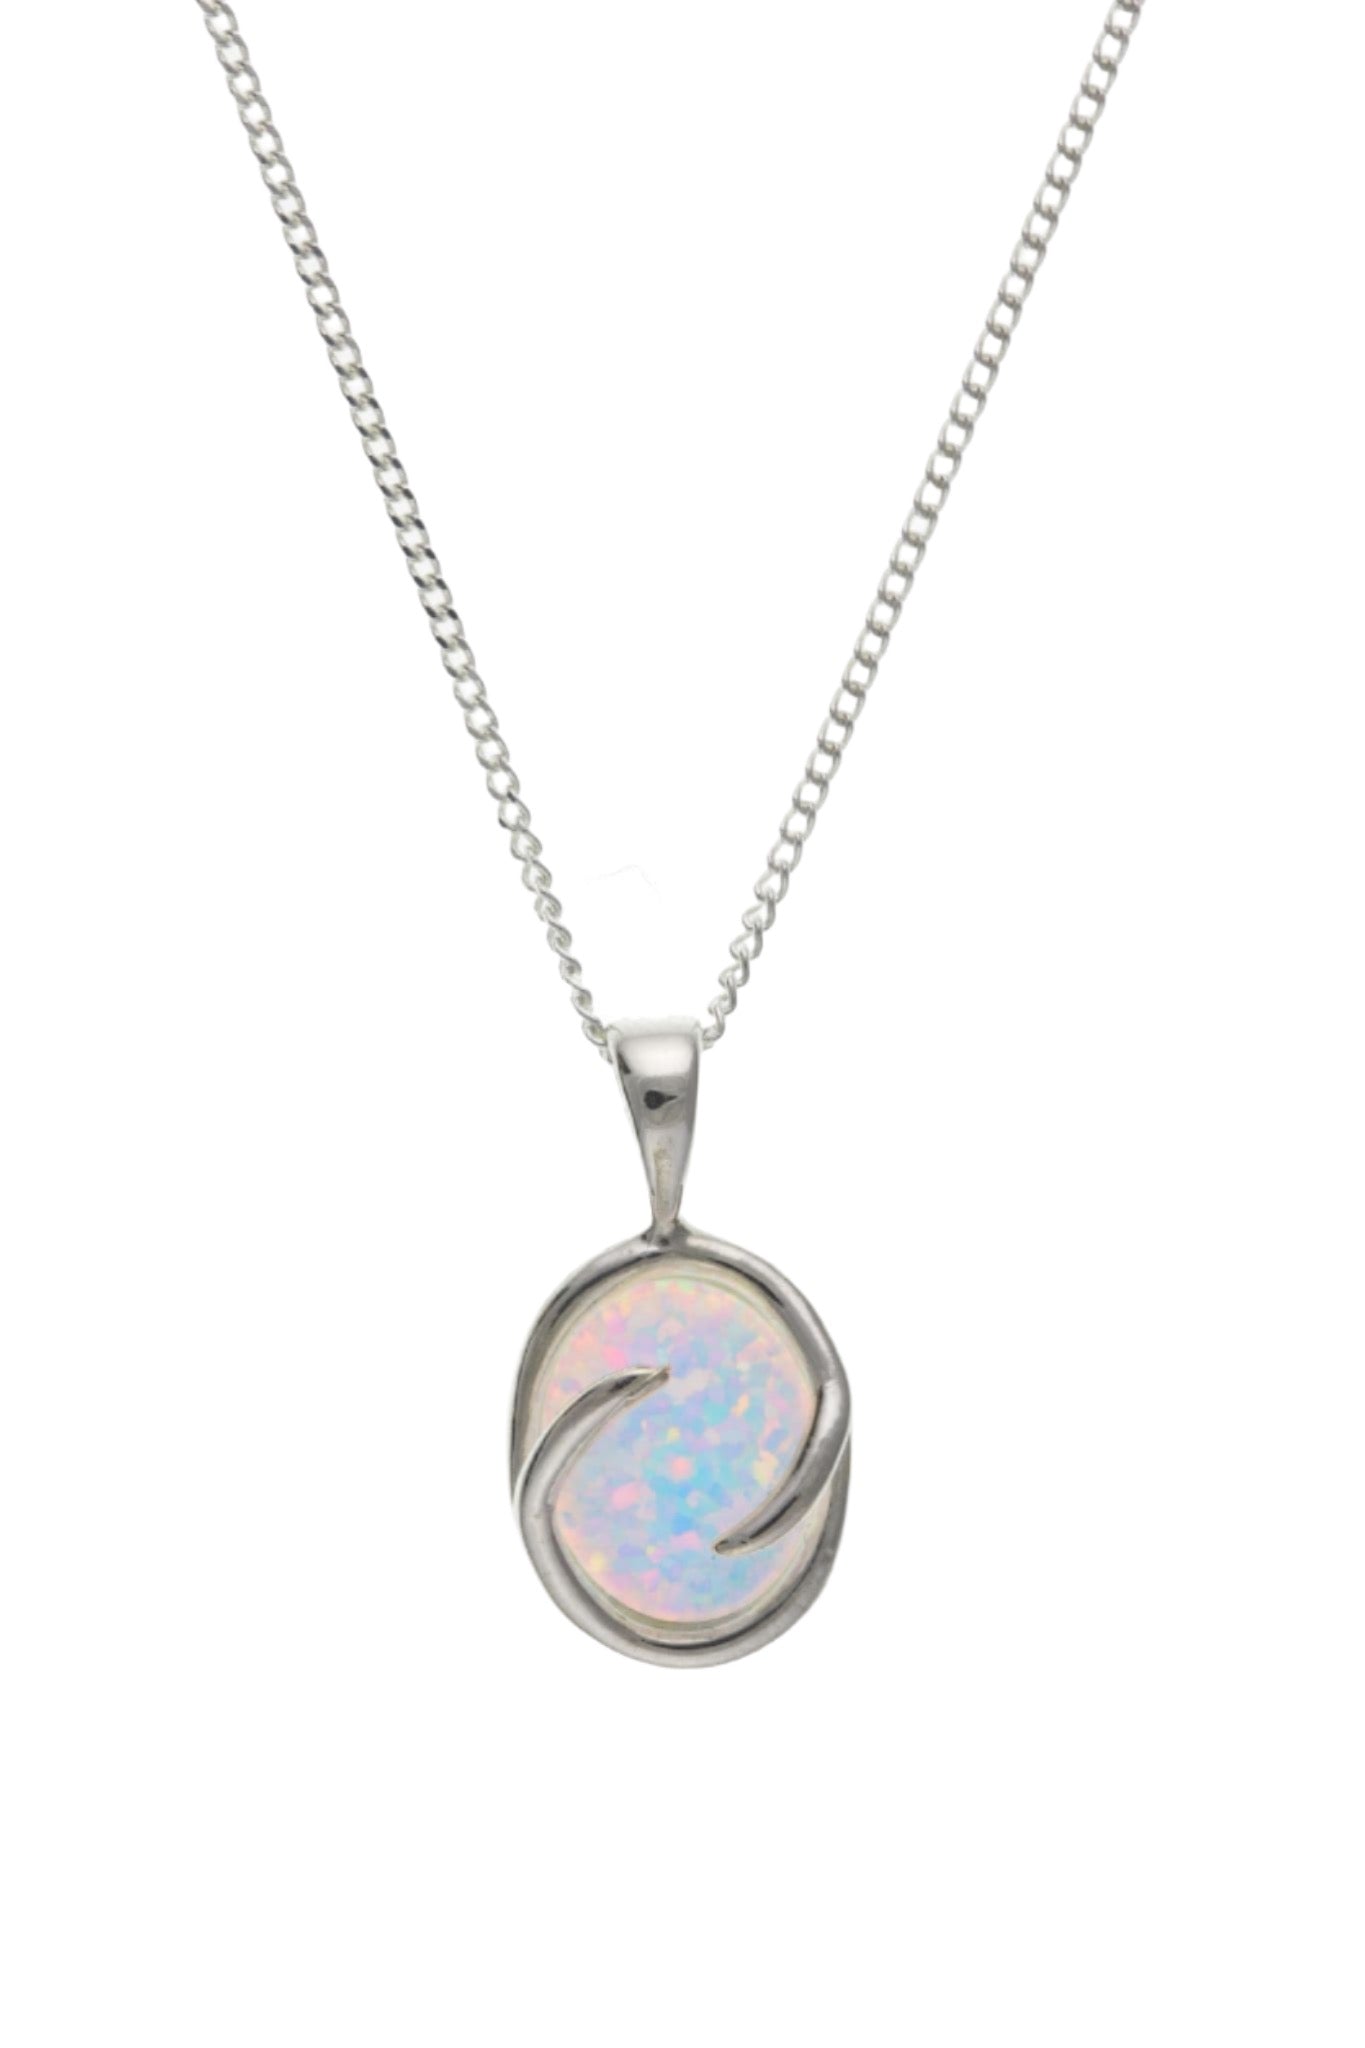 Sterling Silver Opal Oval Necklace With Swirl Edging